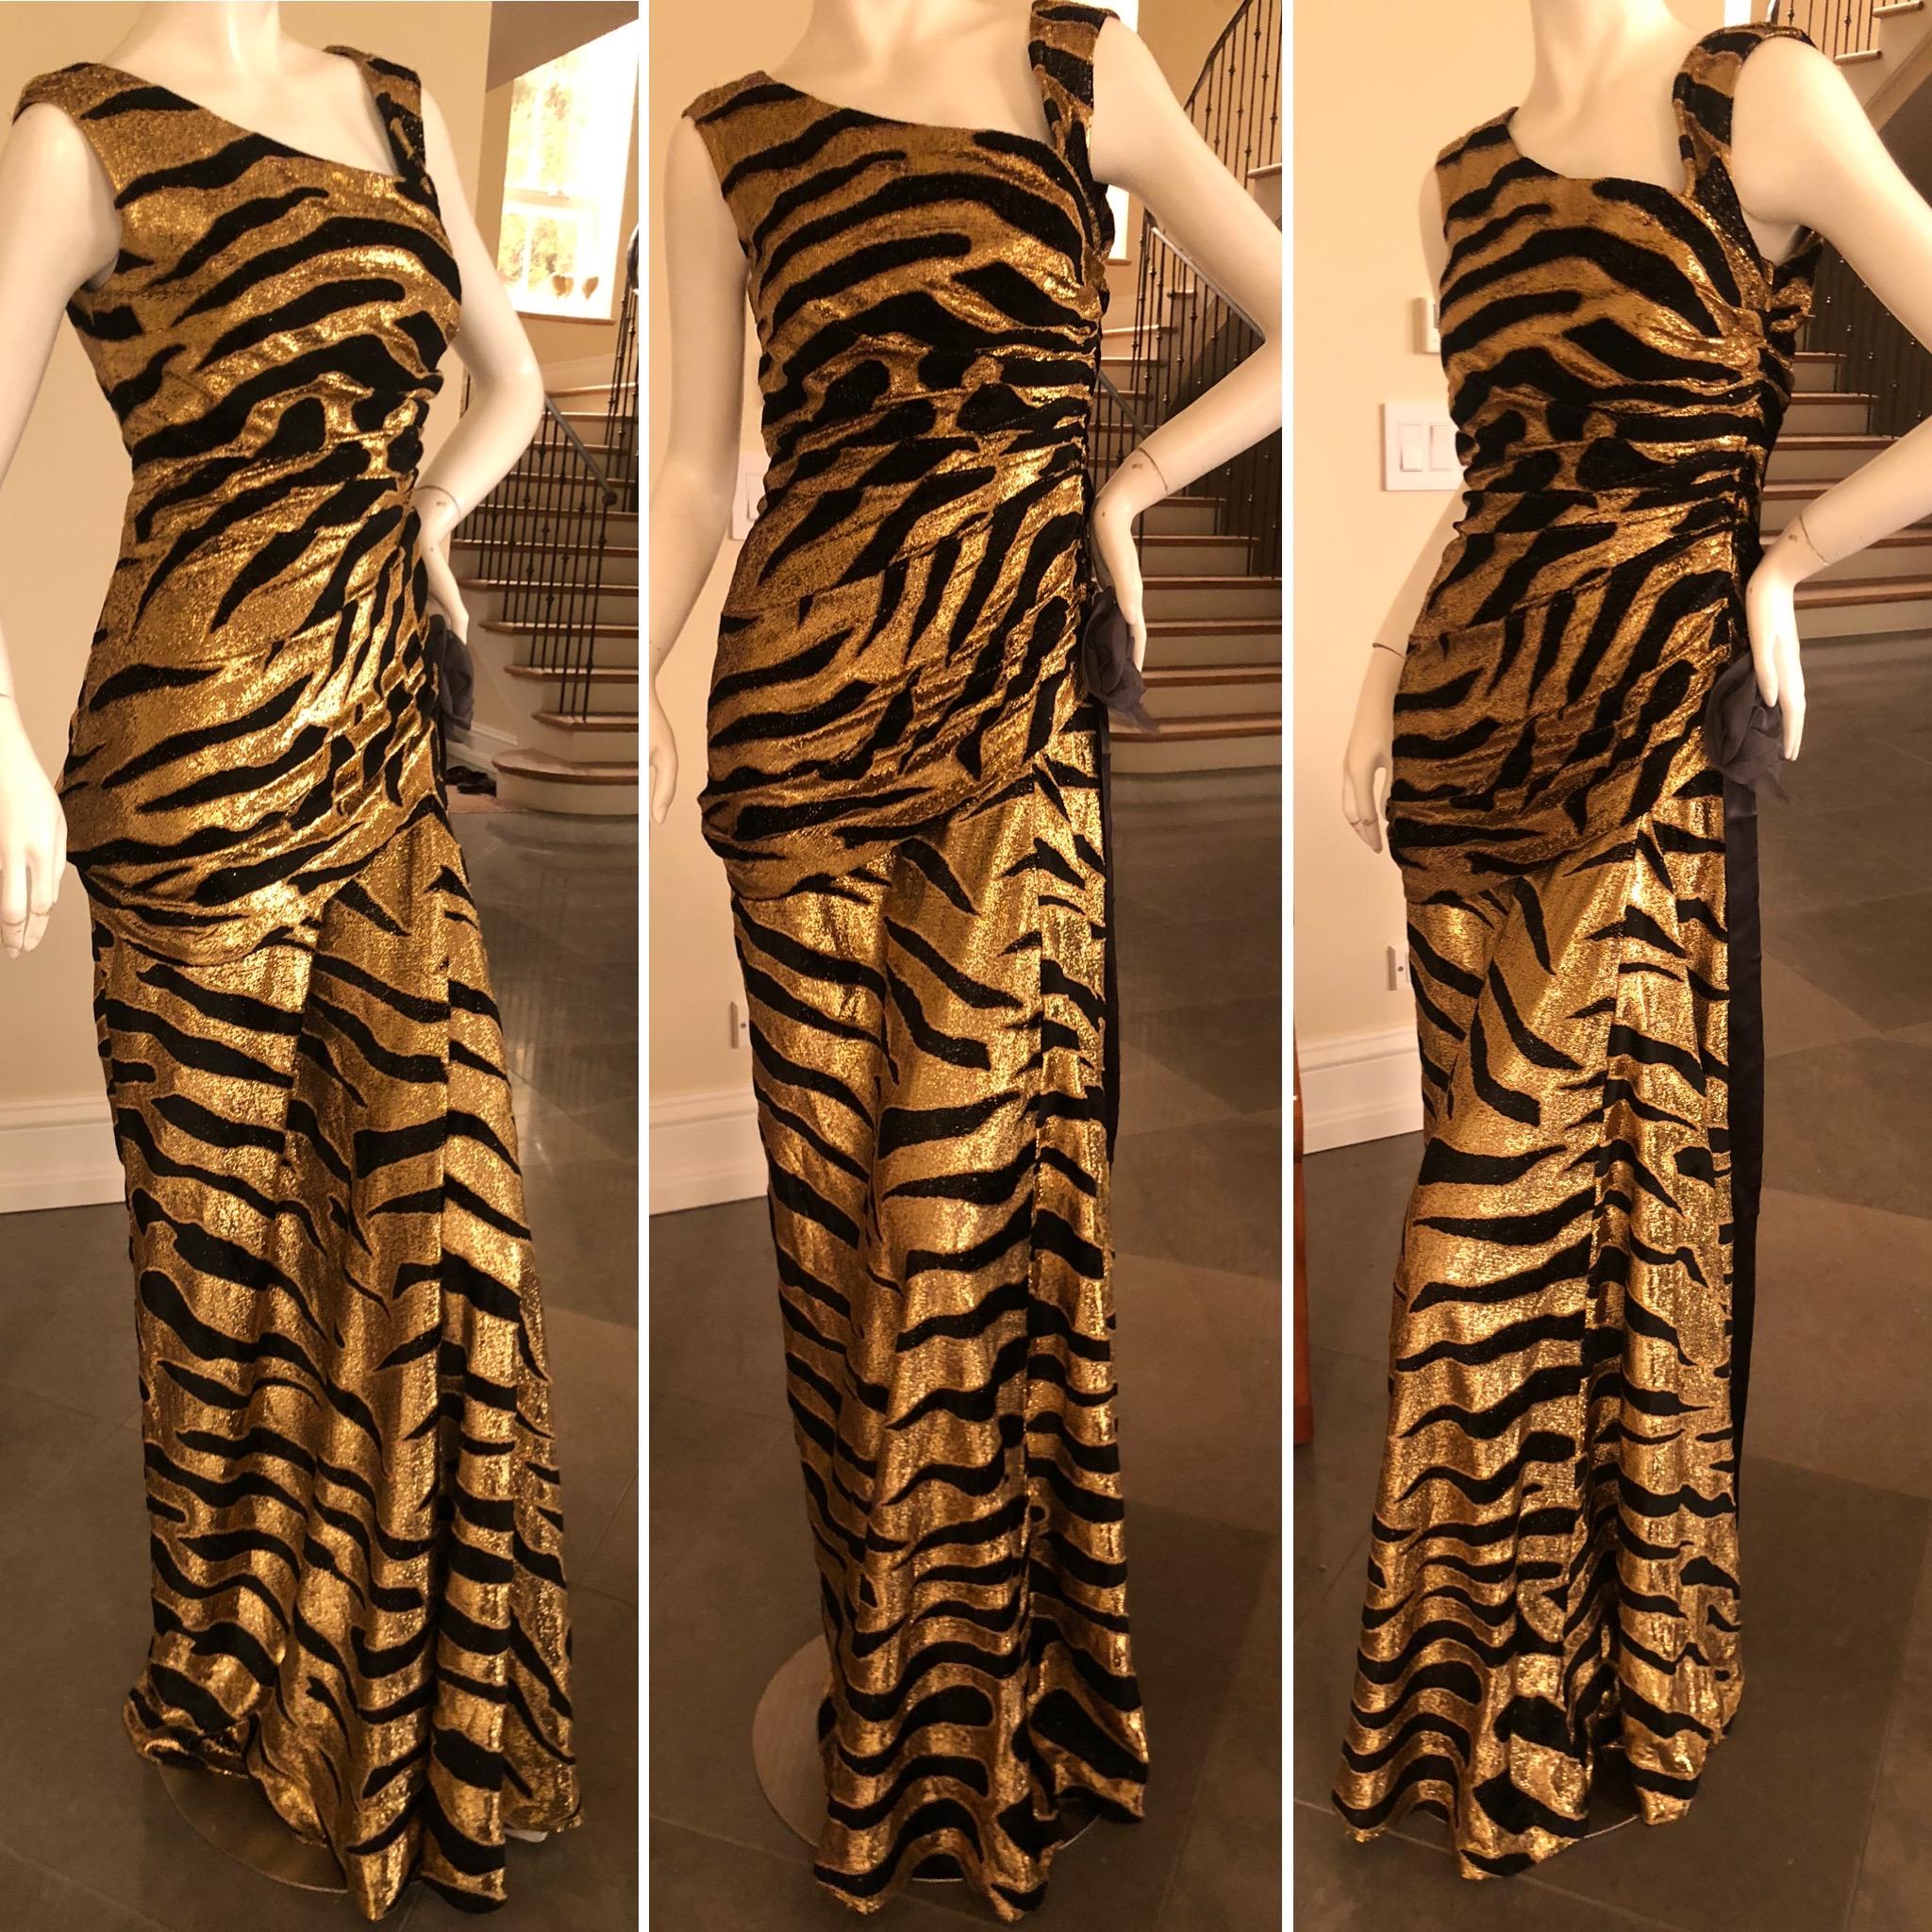 Tuleh Vintage Gold Flecked Tiger Stripe Velvet Draped Evening Dress.
This is so pretty, with a lovely shimmery color to the gold.
 Size 8
 Bust 38